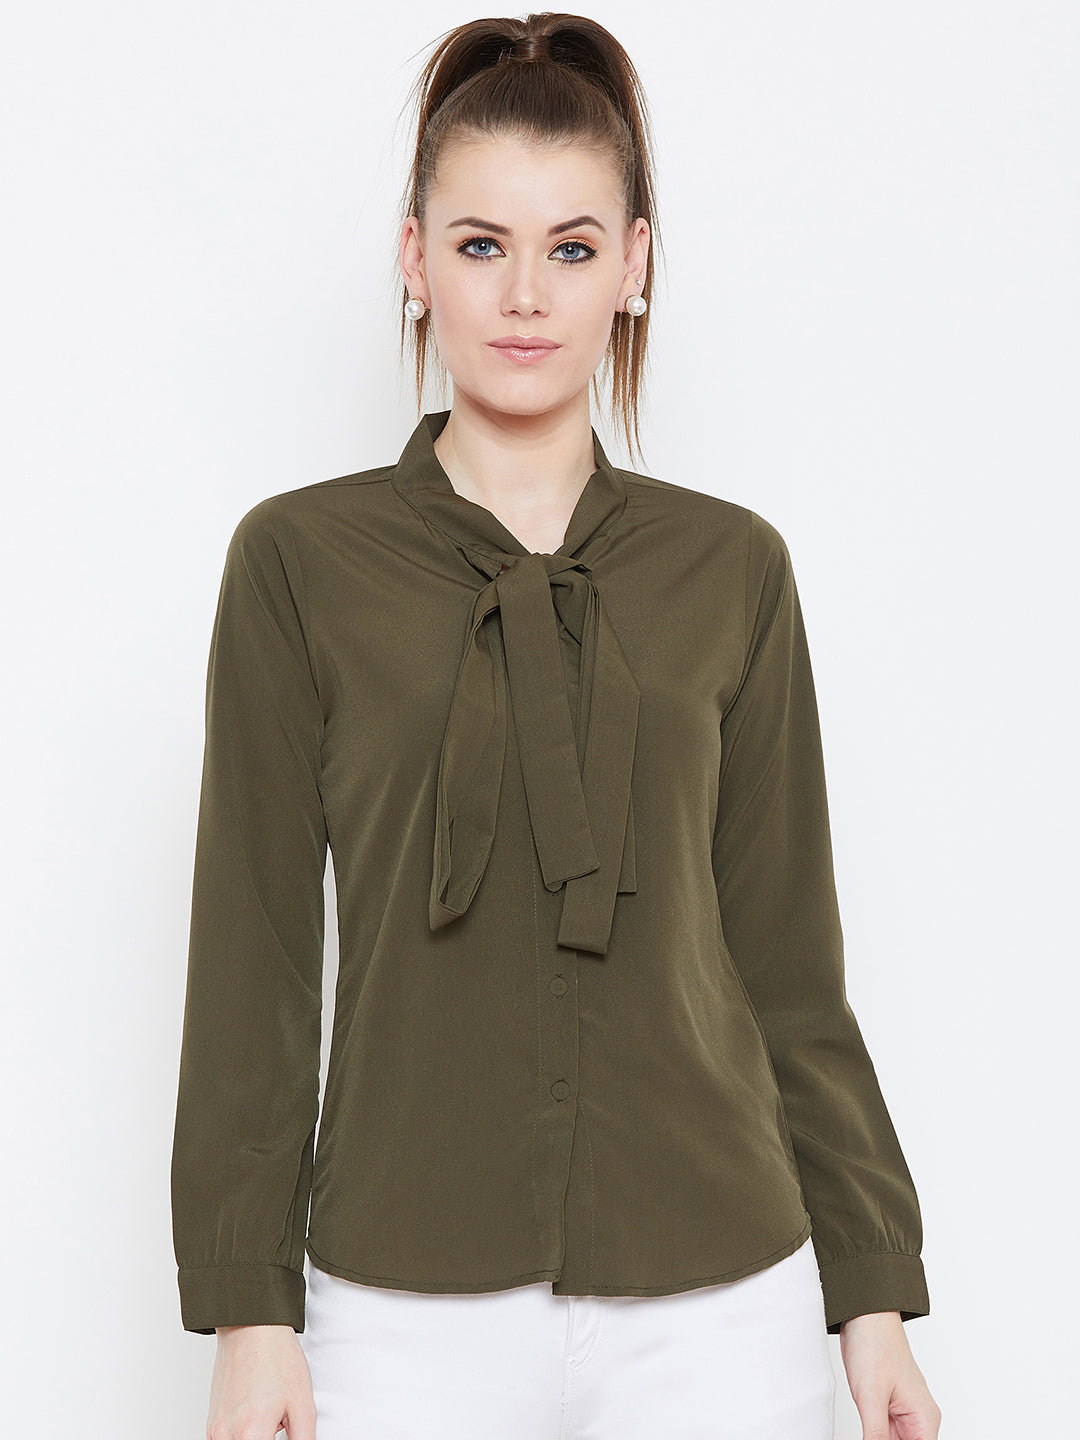 Berrylush Women Solid Olive Green Tie-Up Neck Cuffed Sleeves Shirt Style Top